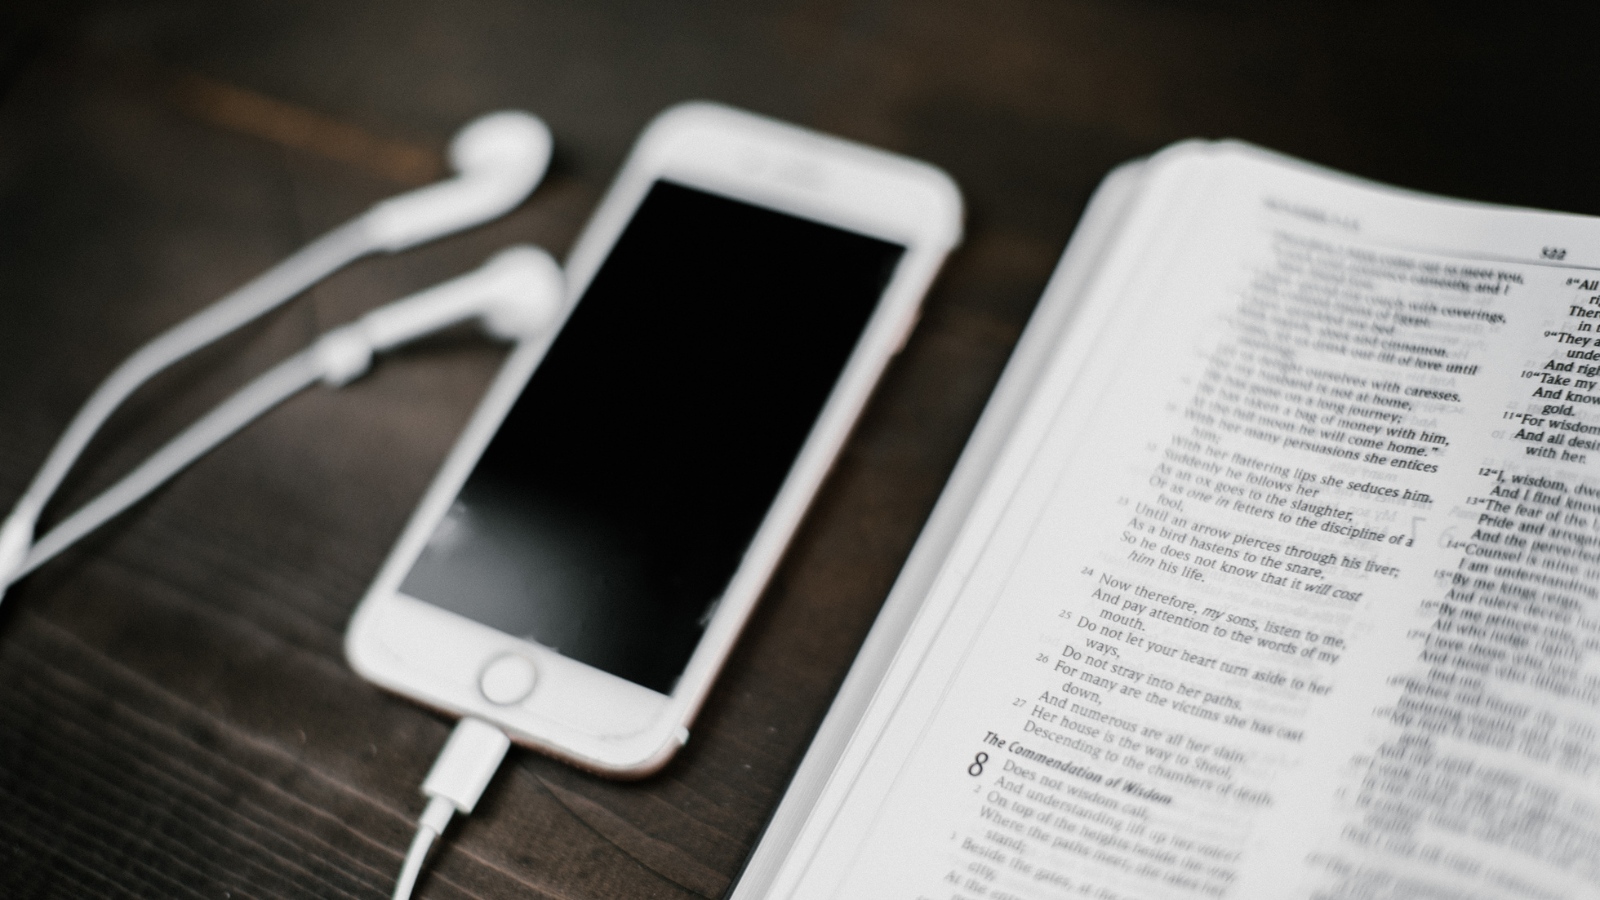 An iphone with earbuds next to an open bible.